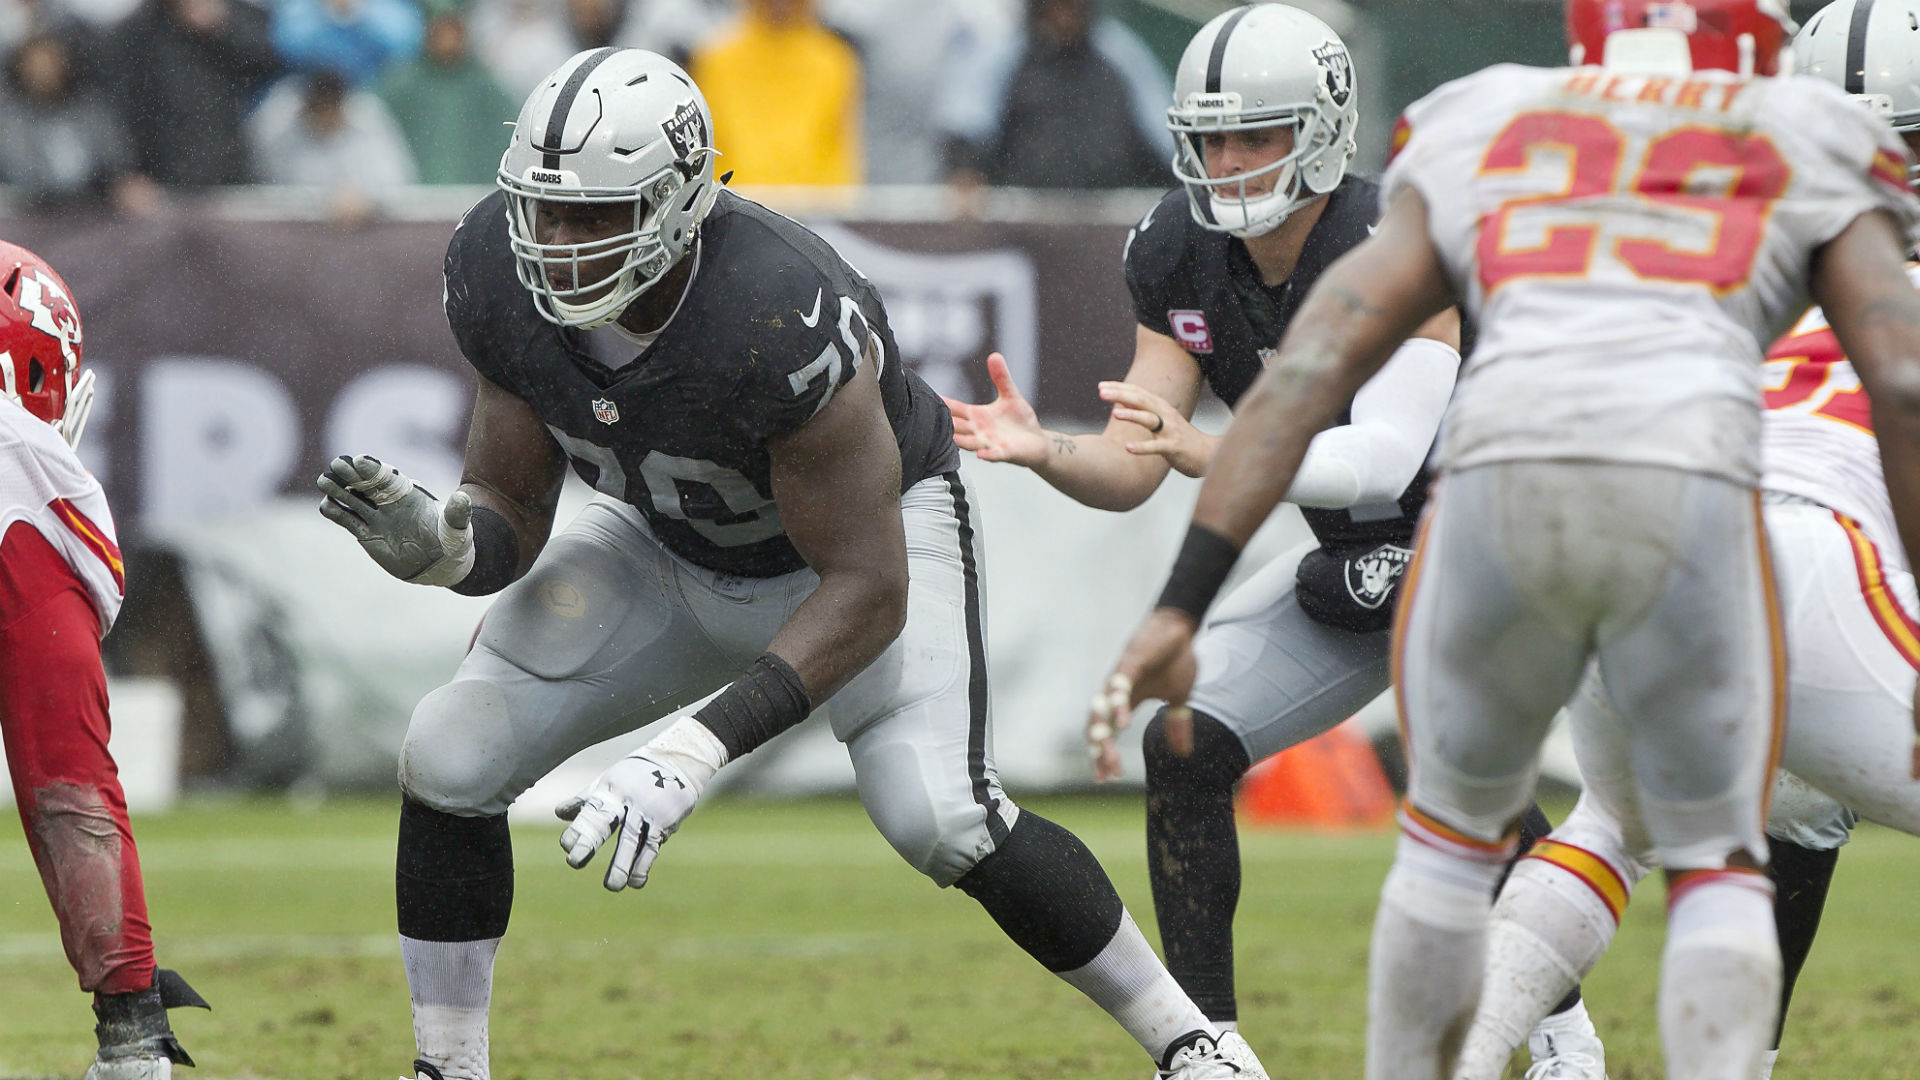 NFL trade rumors: Jets to acquire guard Kelechi Osemele from Raiders